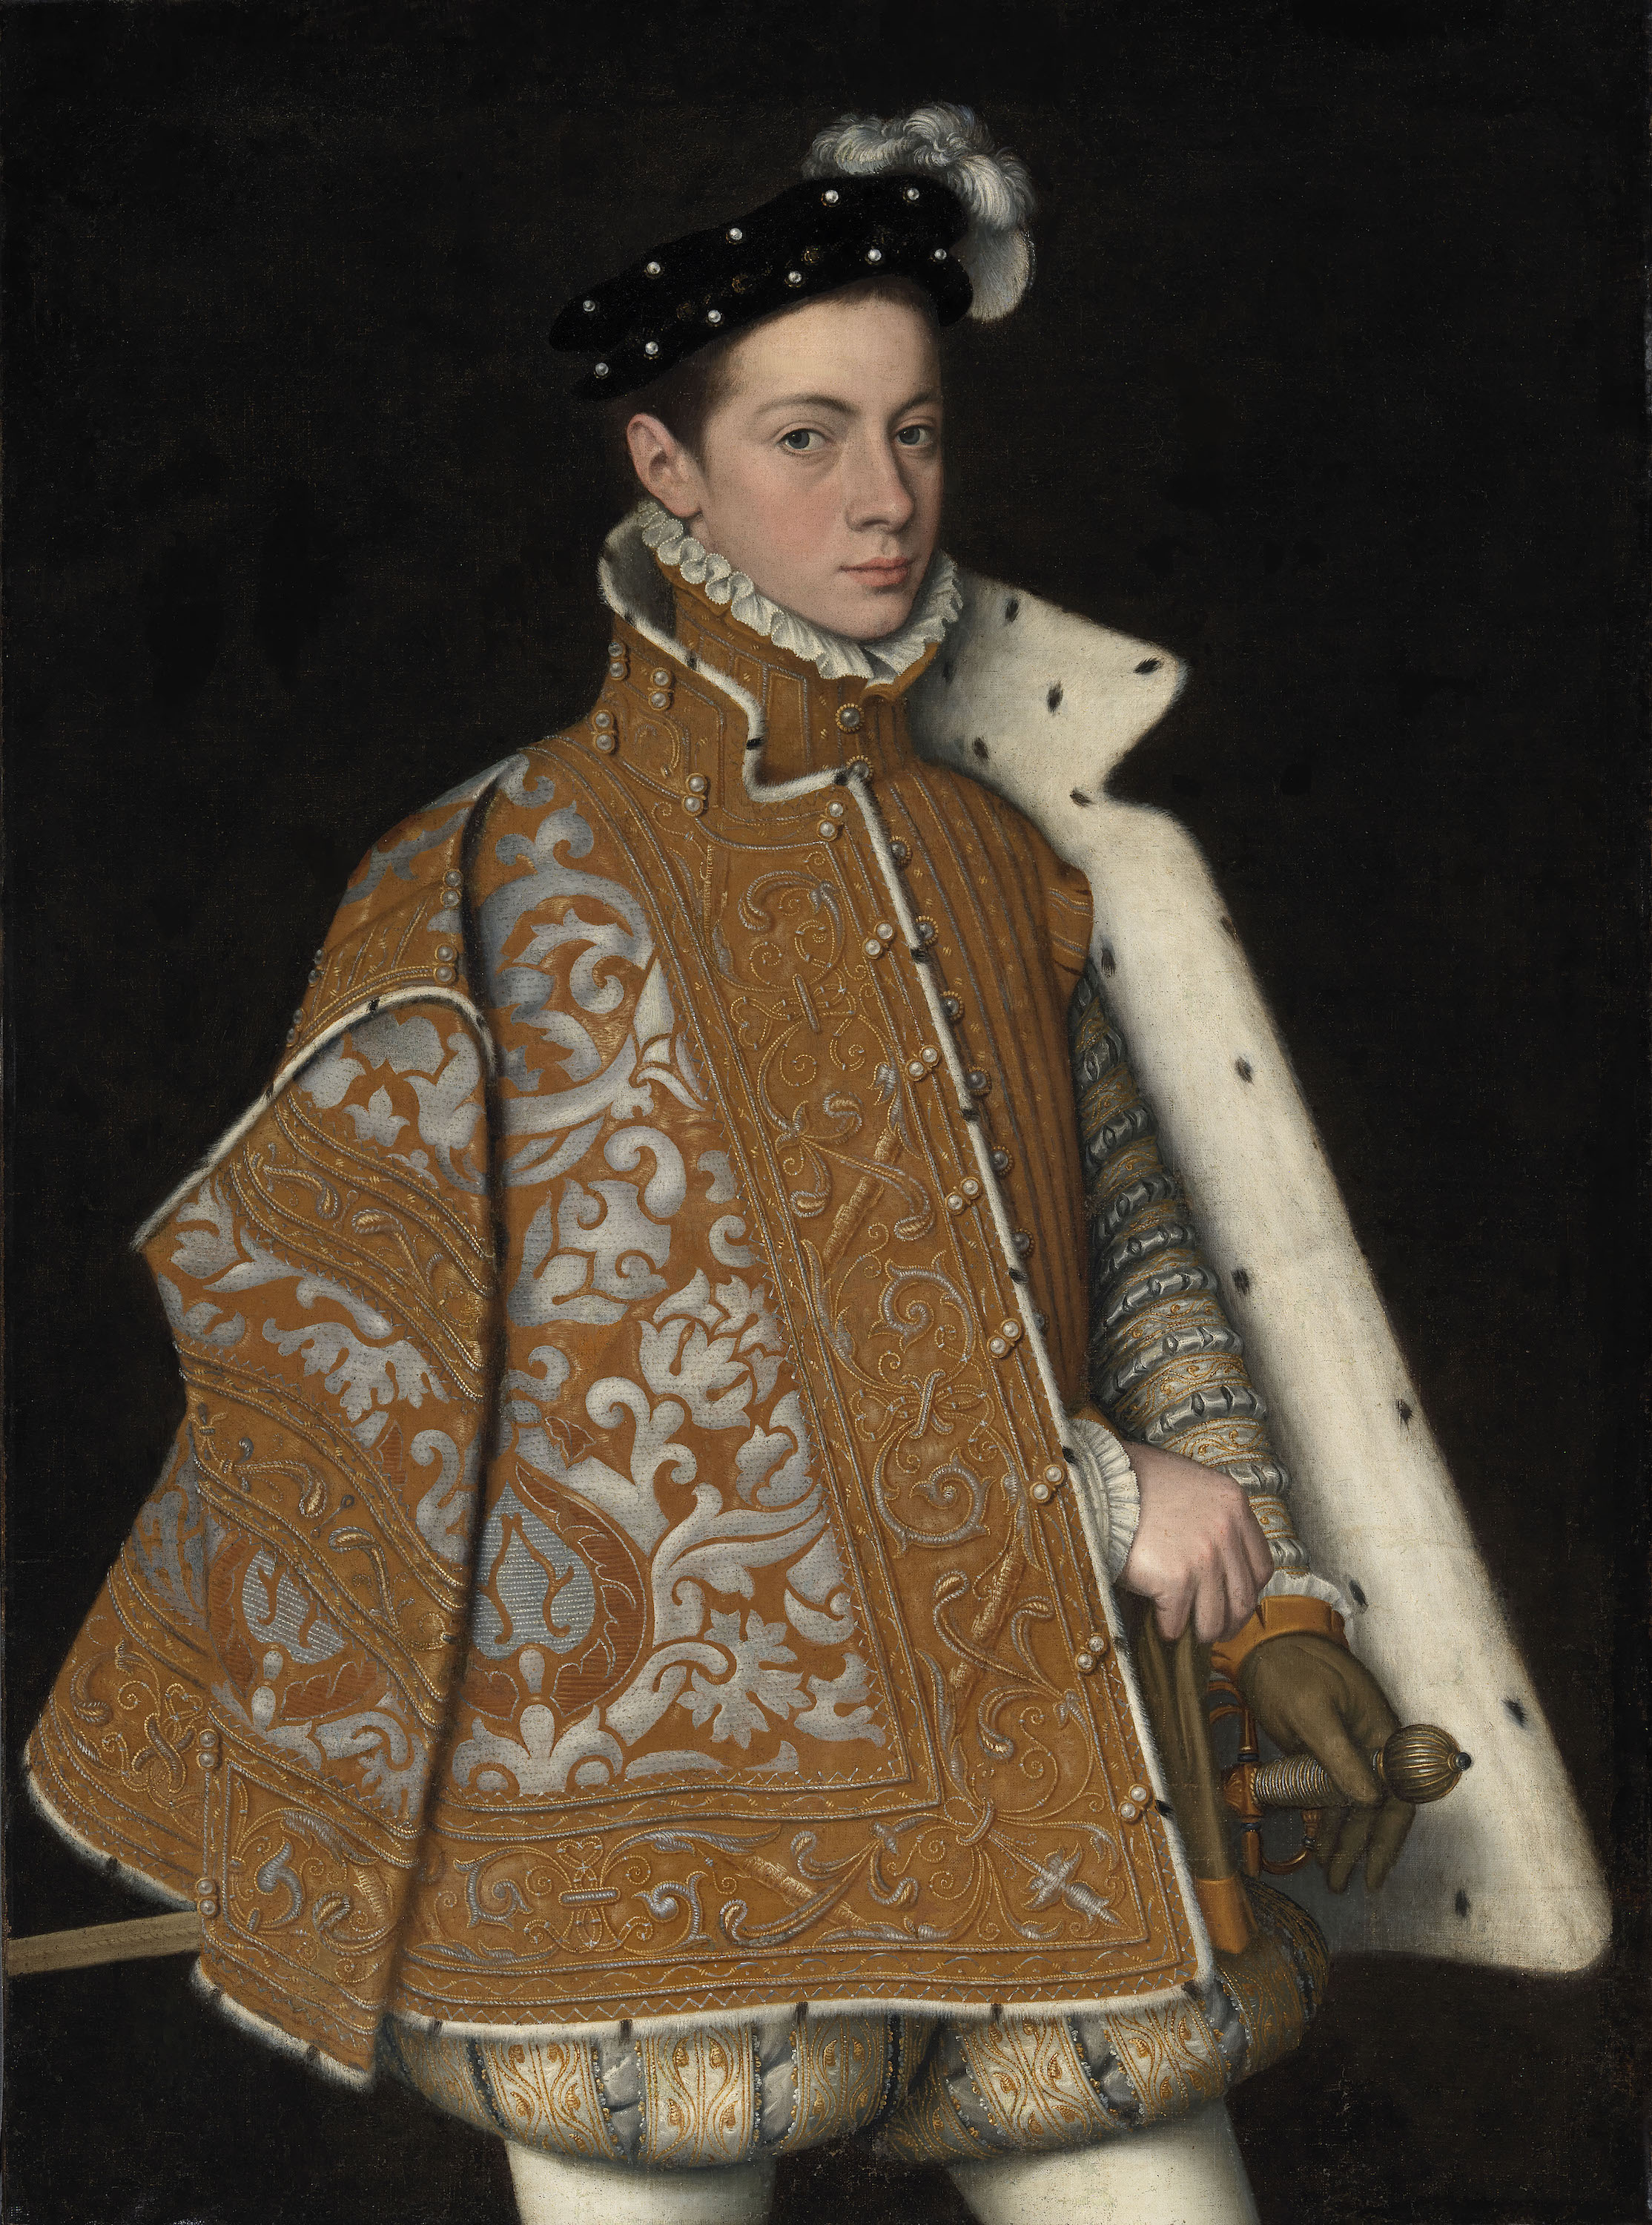 Portrait of Prince Alessandro Farnese by Sofonisba Anguissola - c.1560 - 107 x 79 cm National Gallery of Ireland